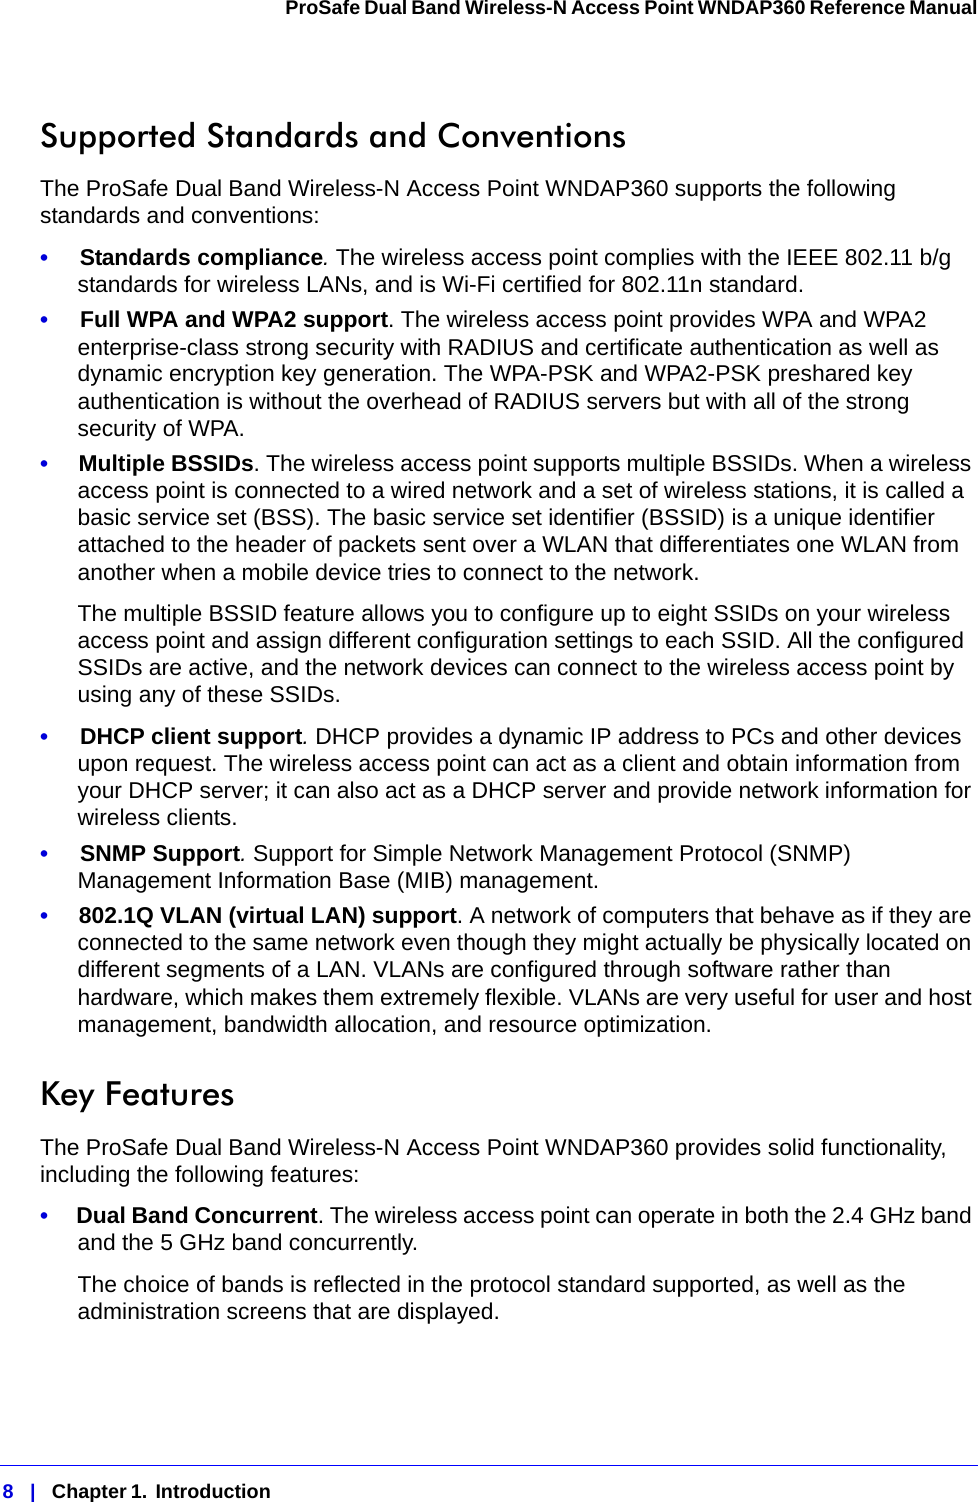 8   |   Chapter 1.  Introduction  ProSafe Dual Band Wireless-N Access Point WNDAP360 Reference Manual Supported Standards and ConventionsThe ProSafe Dual Band Wireless-N Access Point WNDAP360 supports the following standards and conventions:•     Standards compliance. The wireless access point complies with the IEEE 802.11 b/g standards for wireless LANs, and is Wi-Fi certified for 802.11n standard.•     Full WPA and WPA2 support. The wireless access point provides WPA and WPA2 enterprise-class strong security with RADIUS and certificate authentication as well as dynamic encryption key generation. The WPA-PSK and WPA2-PSK preshared key authentication is without the overhead of RADIUS servers but with all of the strong security of WPA.•     Multiple BSSIDs. The wireless access point supports multiple BSSIDs. When a wireless access point is connected to a wired network and a set of wireless stations, it is called a basic service set (BSS). The basic service set identifier (BSSID) is a unique identifier attached to the header of packets sent over a WLAN that differentiates one WLAN from another when a mobile device tries to connect to the network.The multiple BSSID feature allows you to configure up to eight SSIDs on your wireless access point and assign different configuration settings to each SSID. All the configured SSIDs are active, and the network devices can connect to the wireless access point by using any of these SSIDs.•     DHCP client support. DHCP provides a dynamic IP address to PCs and other devices upon request. The wireless access point can act as a client and obtain information from your DHCP server; it can also act as a DHCP server and provide network information for wireless clients.•     SNMP Support. Support for Simple Network Management Protocol (SNMP) Management Information Base (MIB) management.•     802.1Q VLAN (virtual LAN) support. A network of computers that behave as if they are connected to the same network even though they might actually be physically located on different segments of a LAN. VLANs are configured through software rather than hardware, which makes them extremely flexible. VLANs are very useful for user and host management, bandwidth allocation, and resource optimization. Key FeaturesThe ProSafe Dual Band Wireless-N Access Point WNDAP360 provides solid functionality, including the following features:•     Dual Band Concurrent. The wireless access point can operate in both the 2.4 GHz band and the 5 GHz band concurrently.The choice of bands is reflected in the protocol standard supported, as well as the administration screens that are displayed.